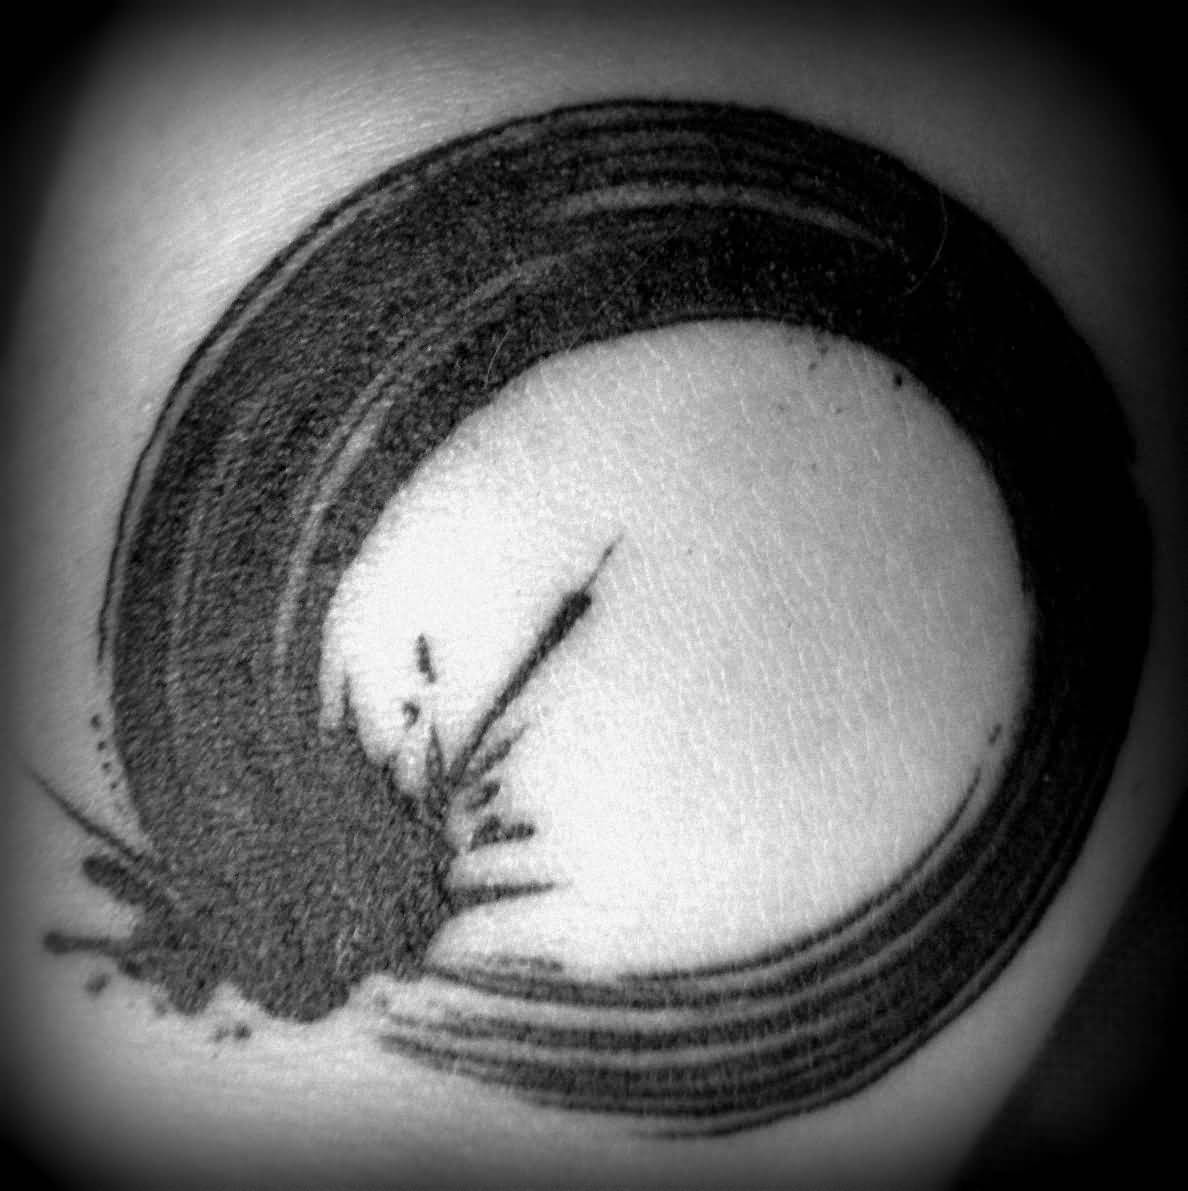 Zen symbol tattoos and their meaning | Tattooing